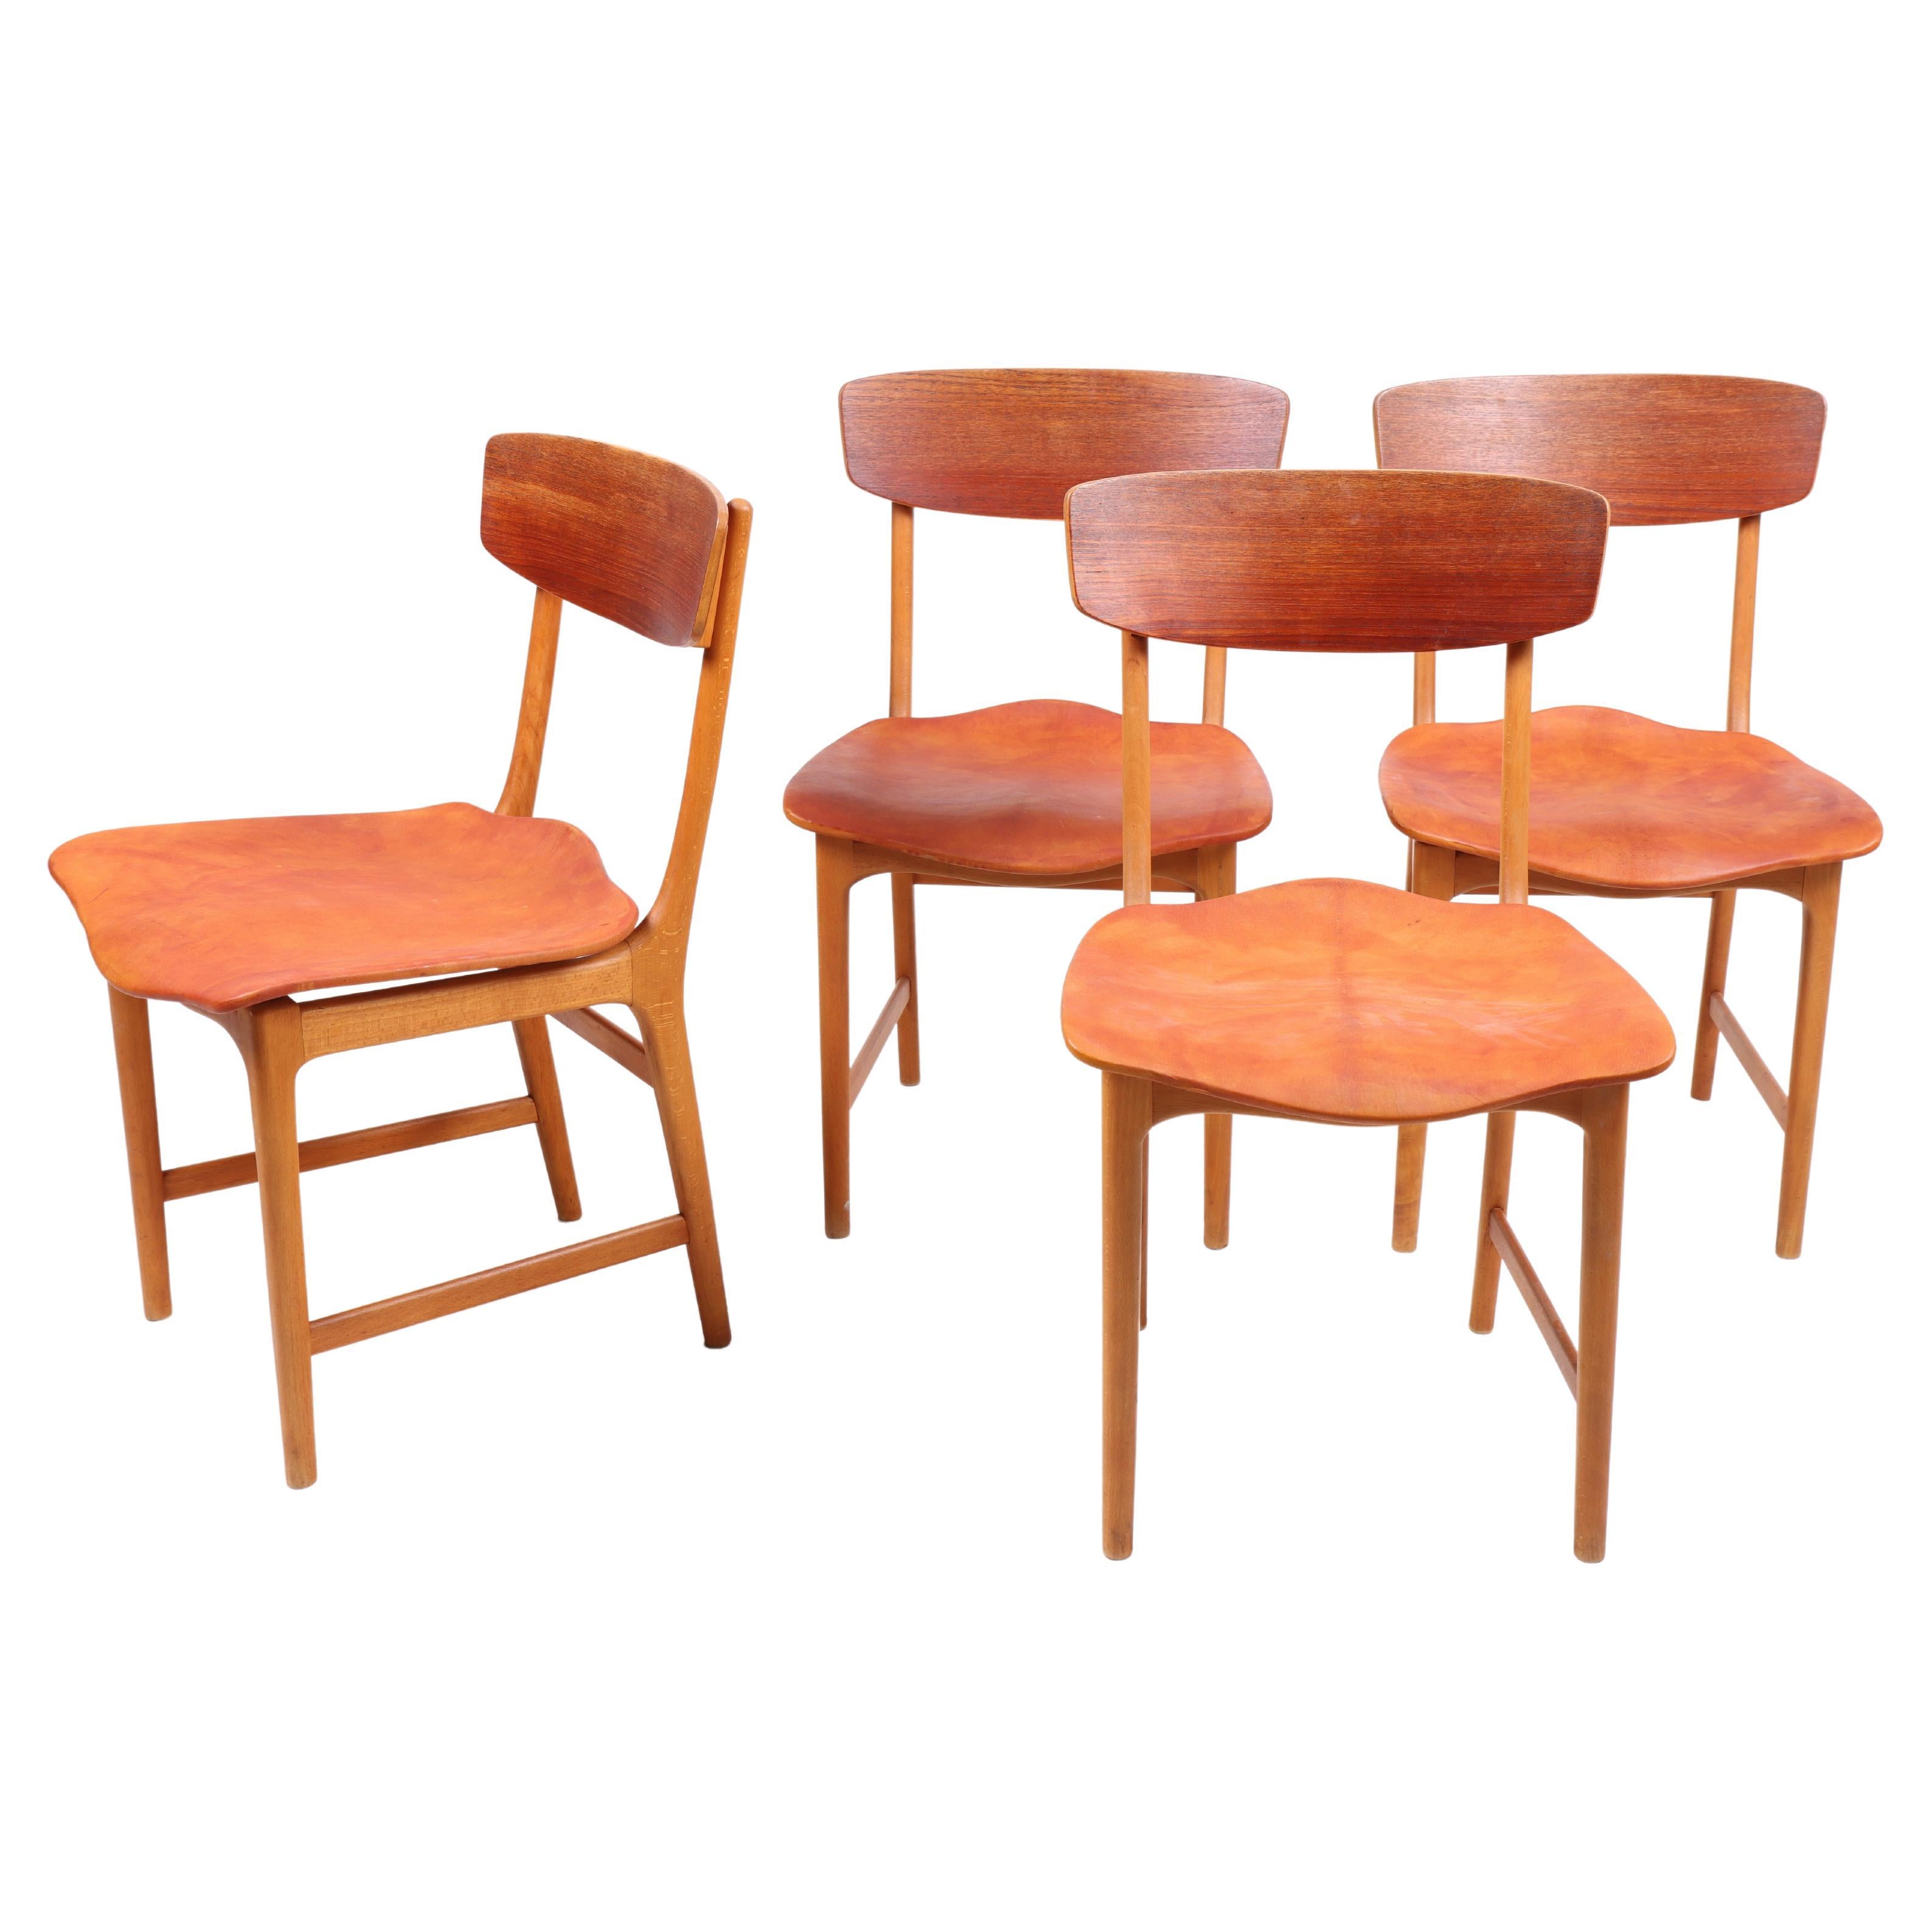 Set of Four Side Chairs in Teak and Leather, Danish Design, 1960s For Sale